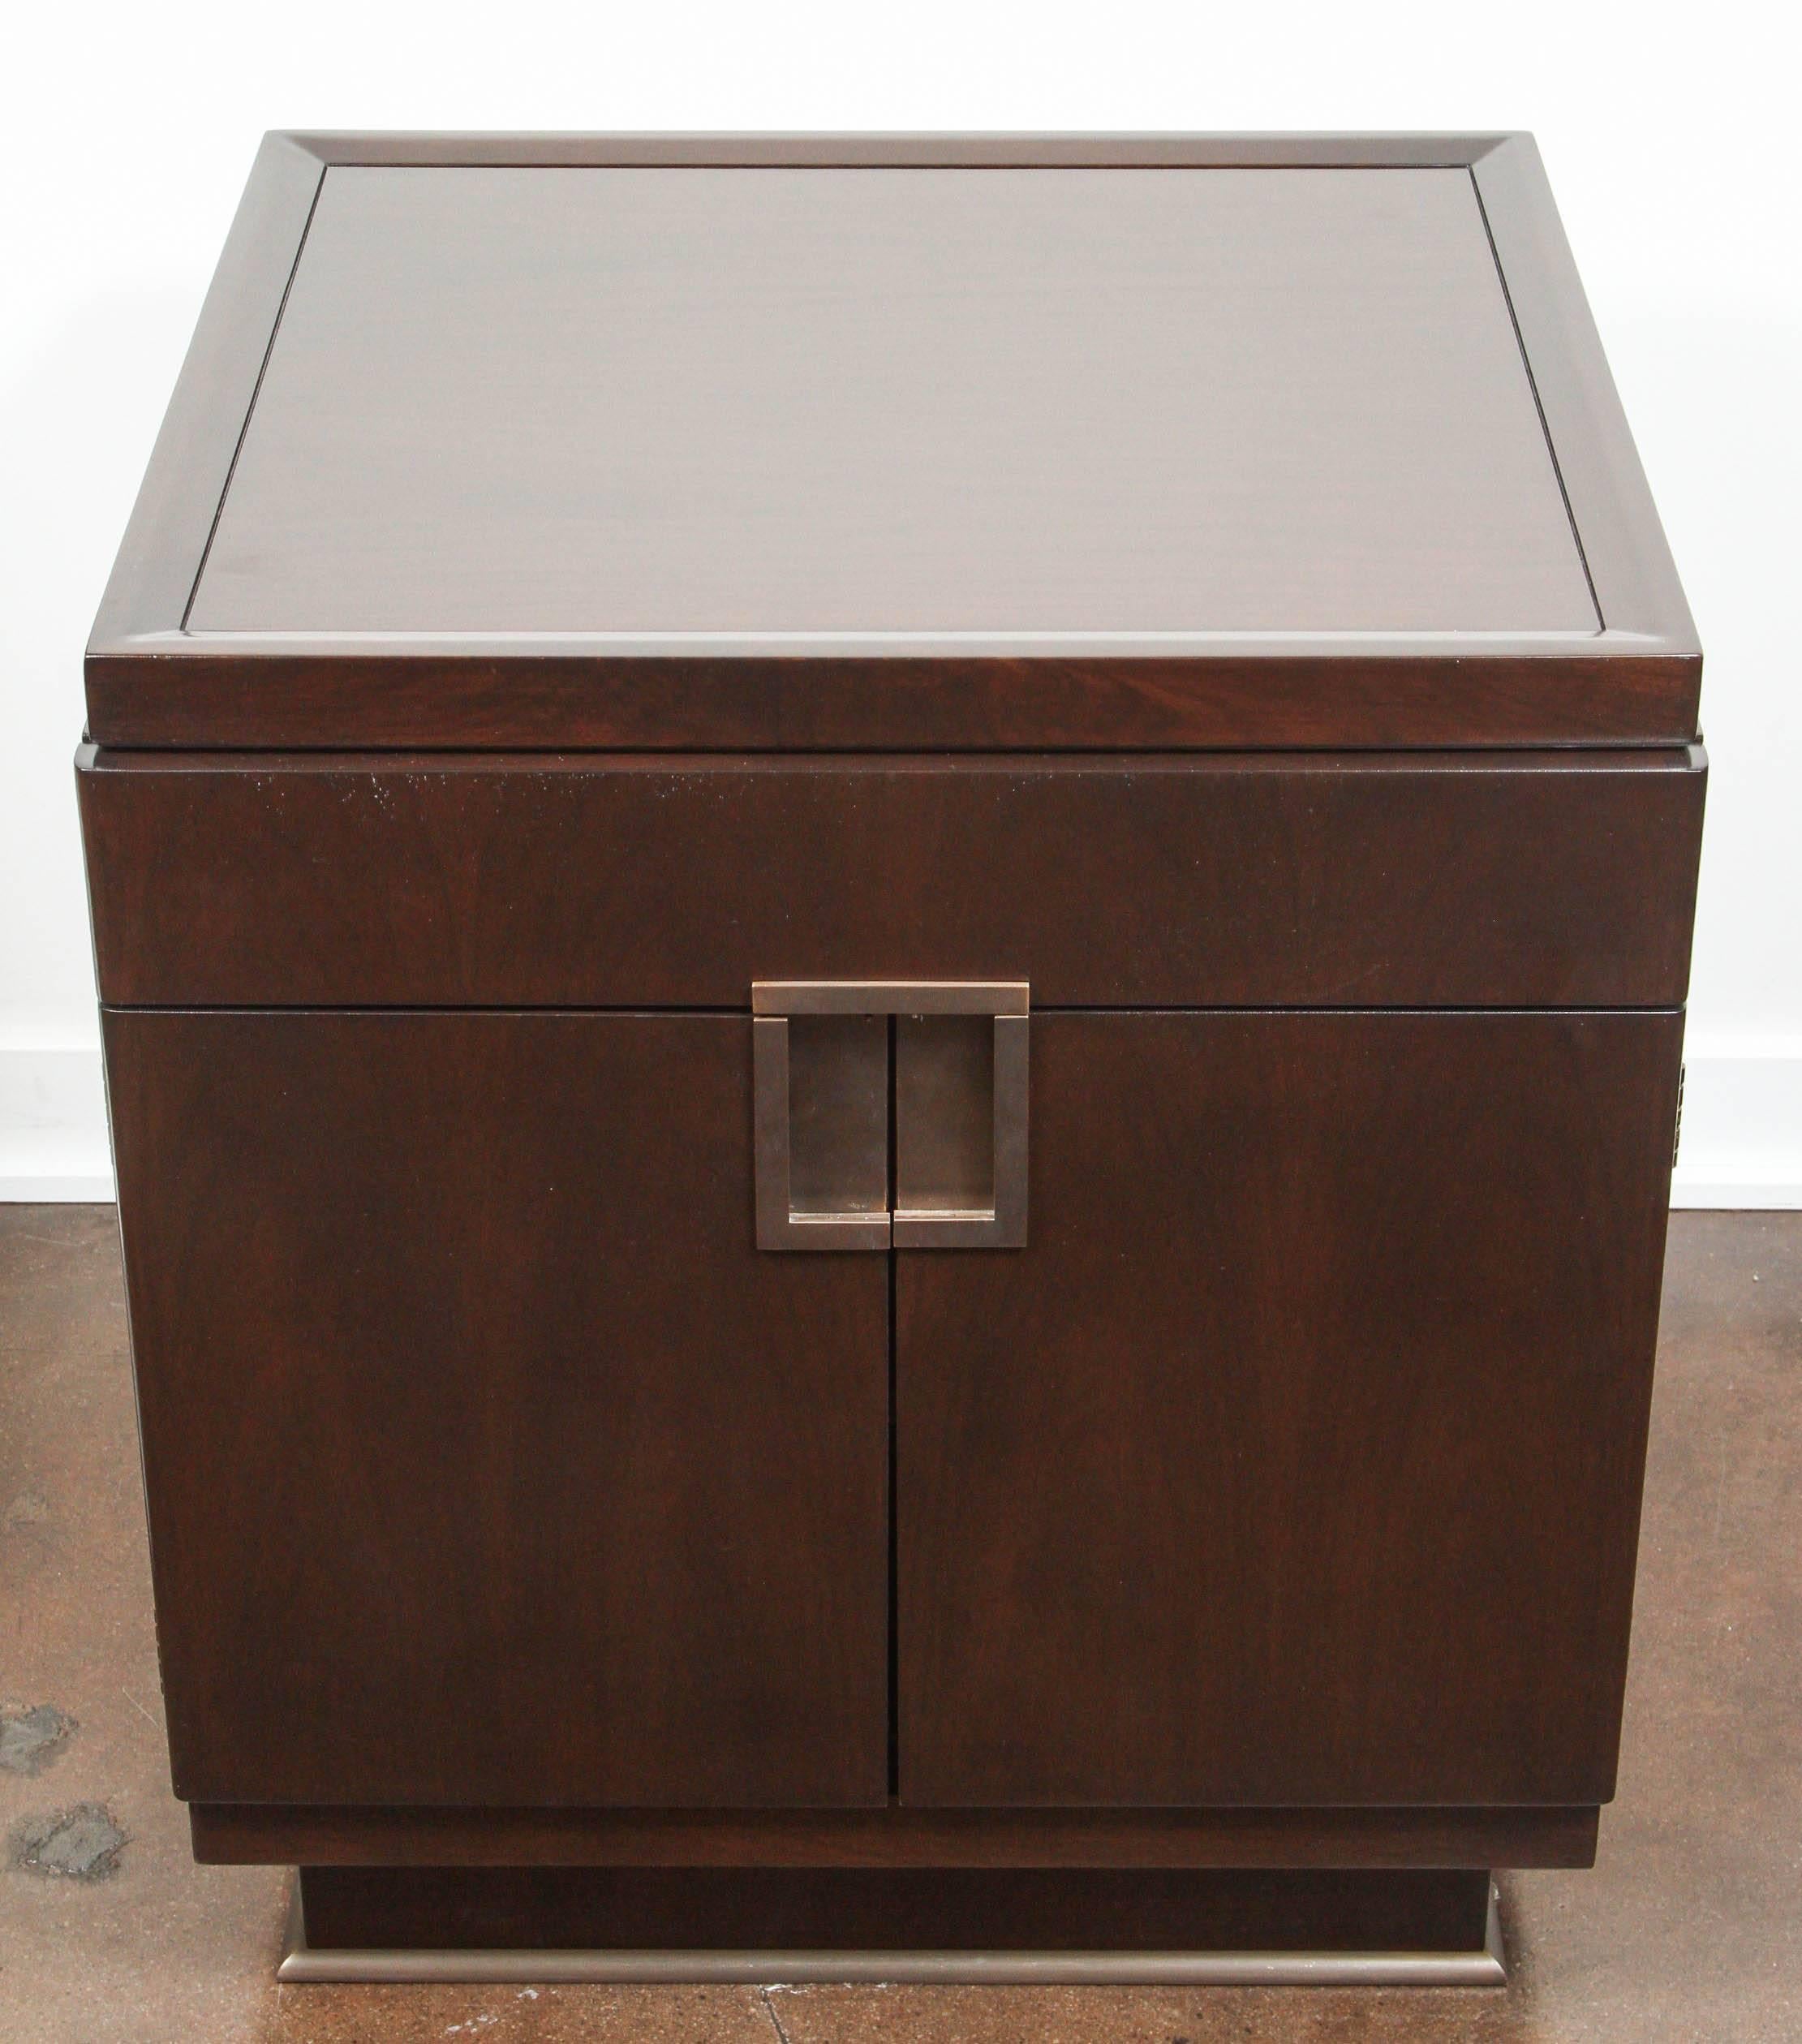 Handsome pair of large boxer chests designed by William Sofield for Baker Furniture.

The chests are in beautiful condition, made of solid American black walnut with polished bronze fittings and handles. They sit on bronze plinth bases.

  